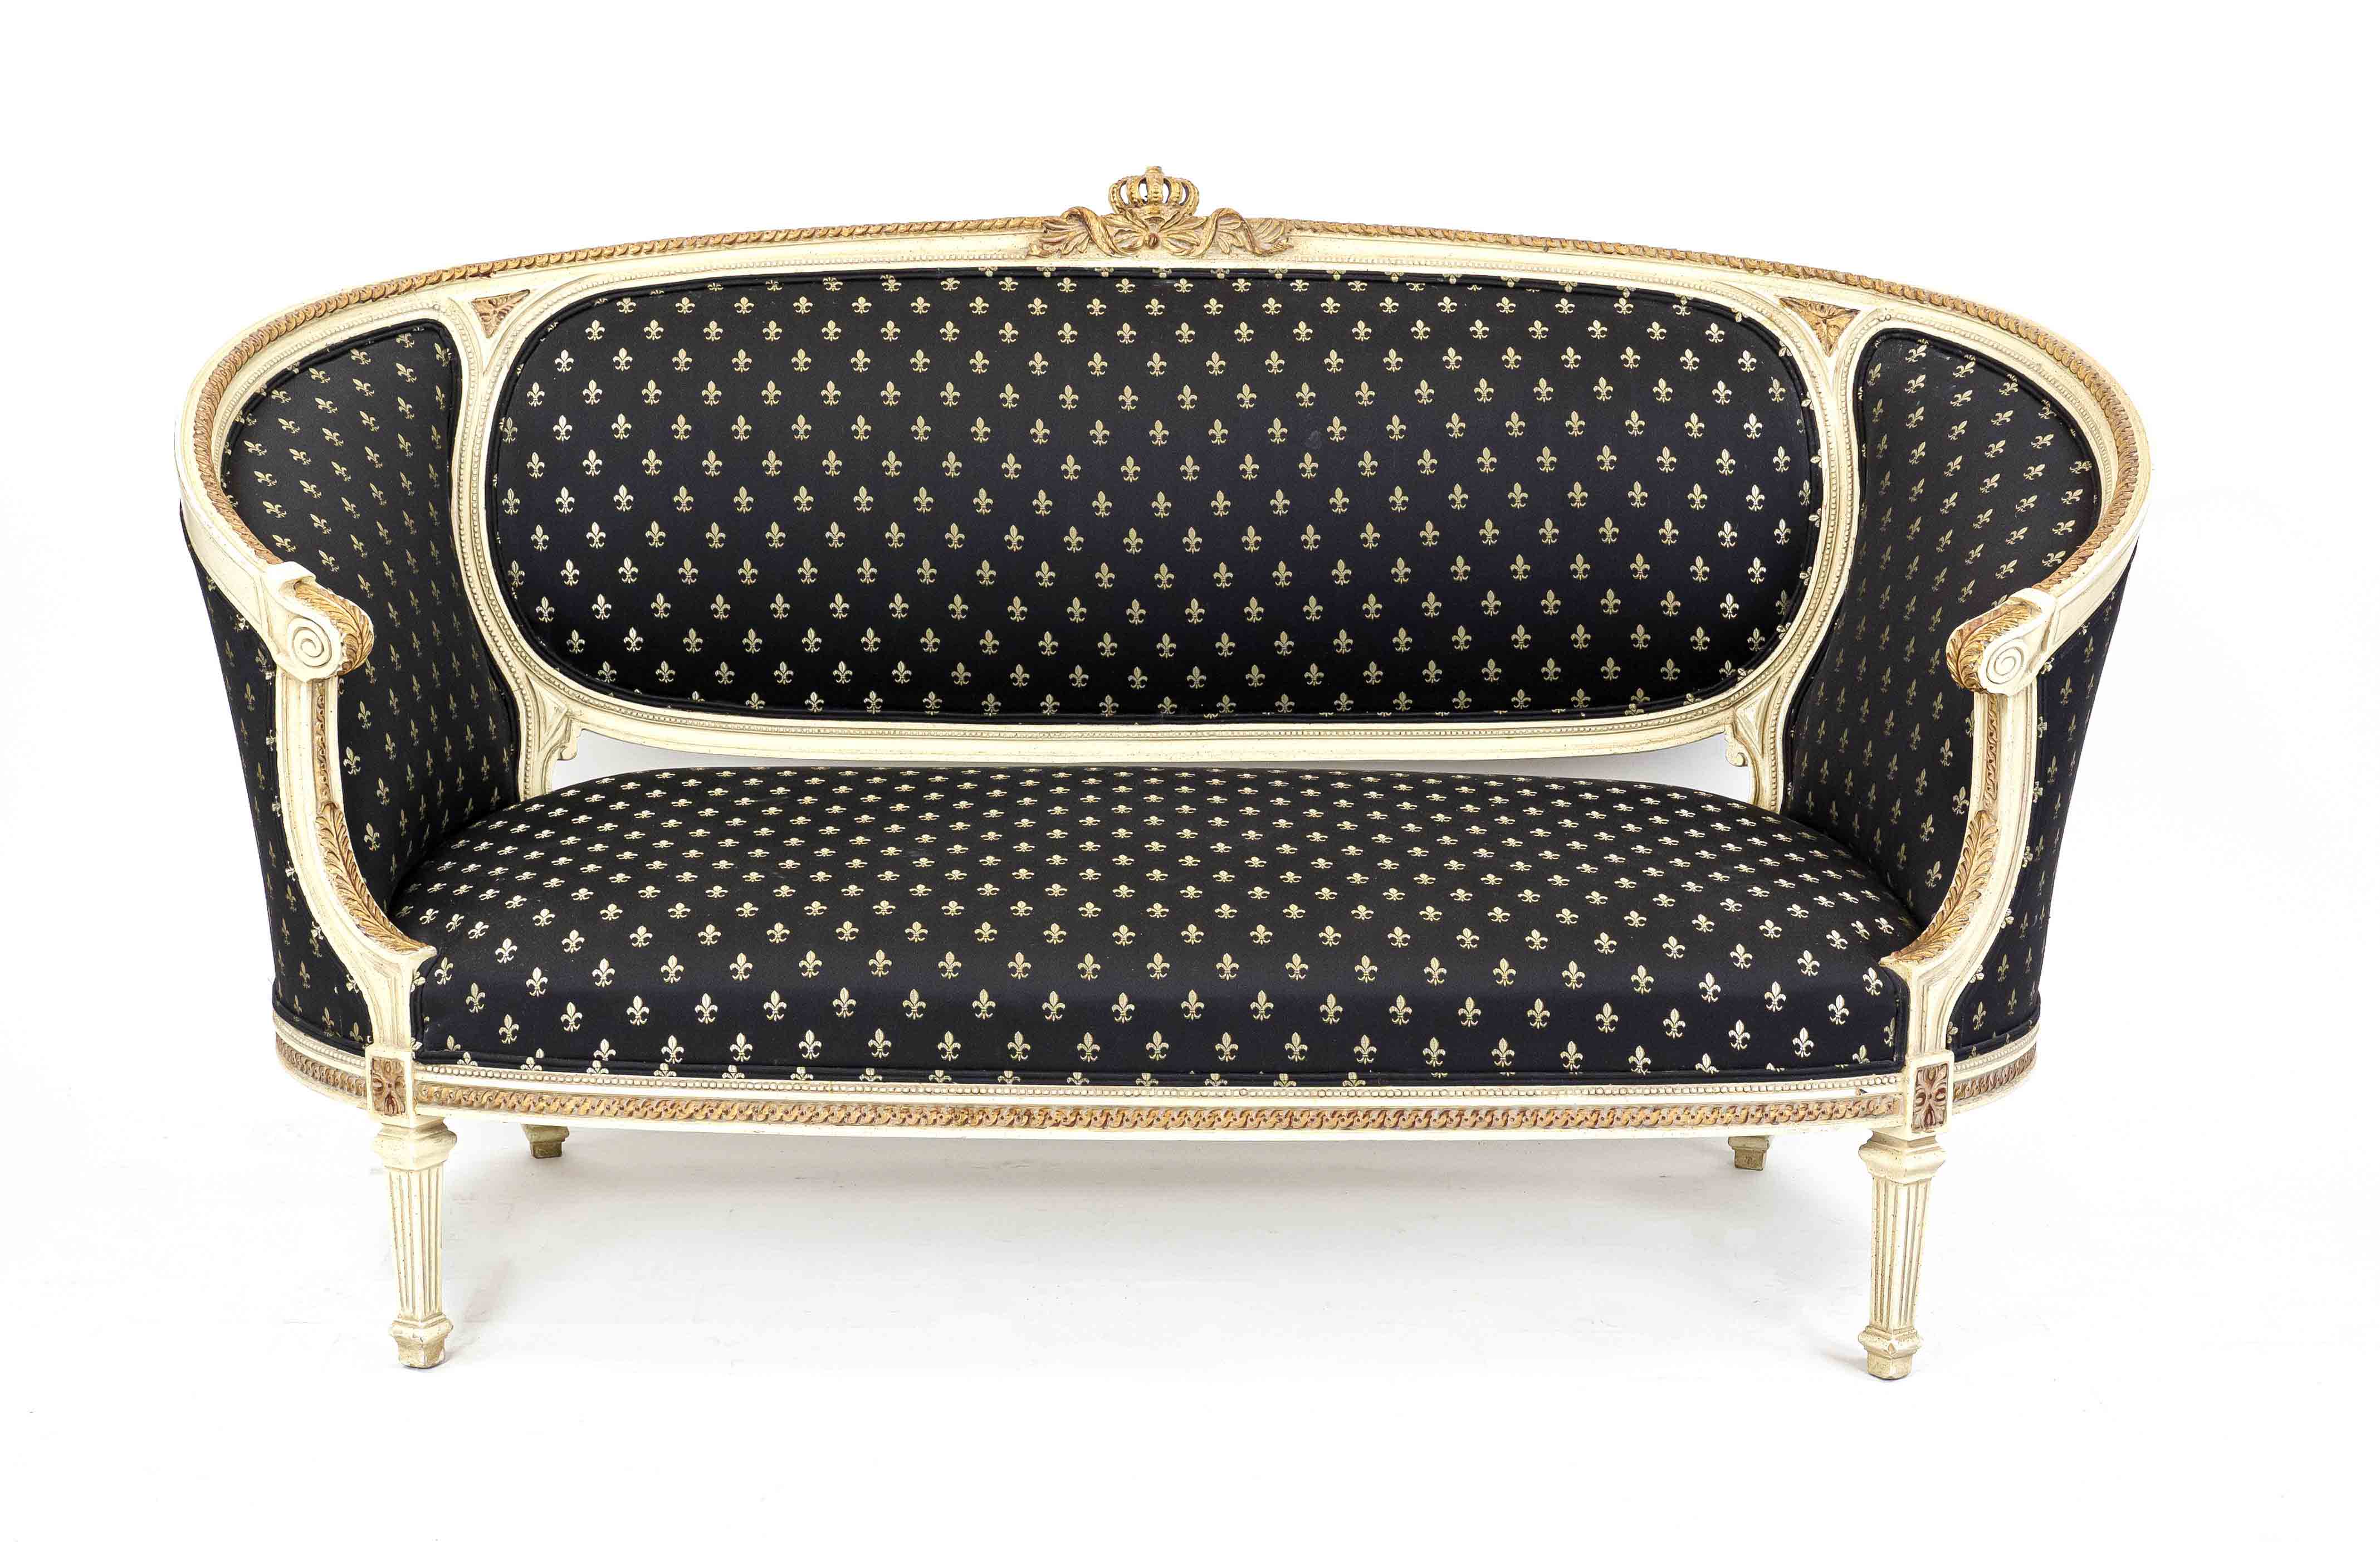 Elegant sofa in Louis-Seize style, 20th century, beechwood carved, painted and partially gilded,